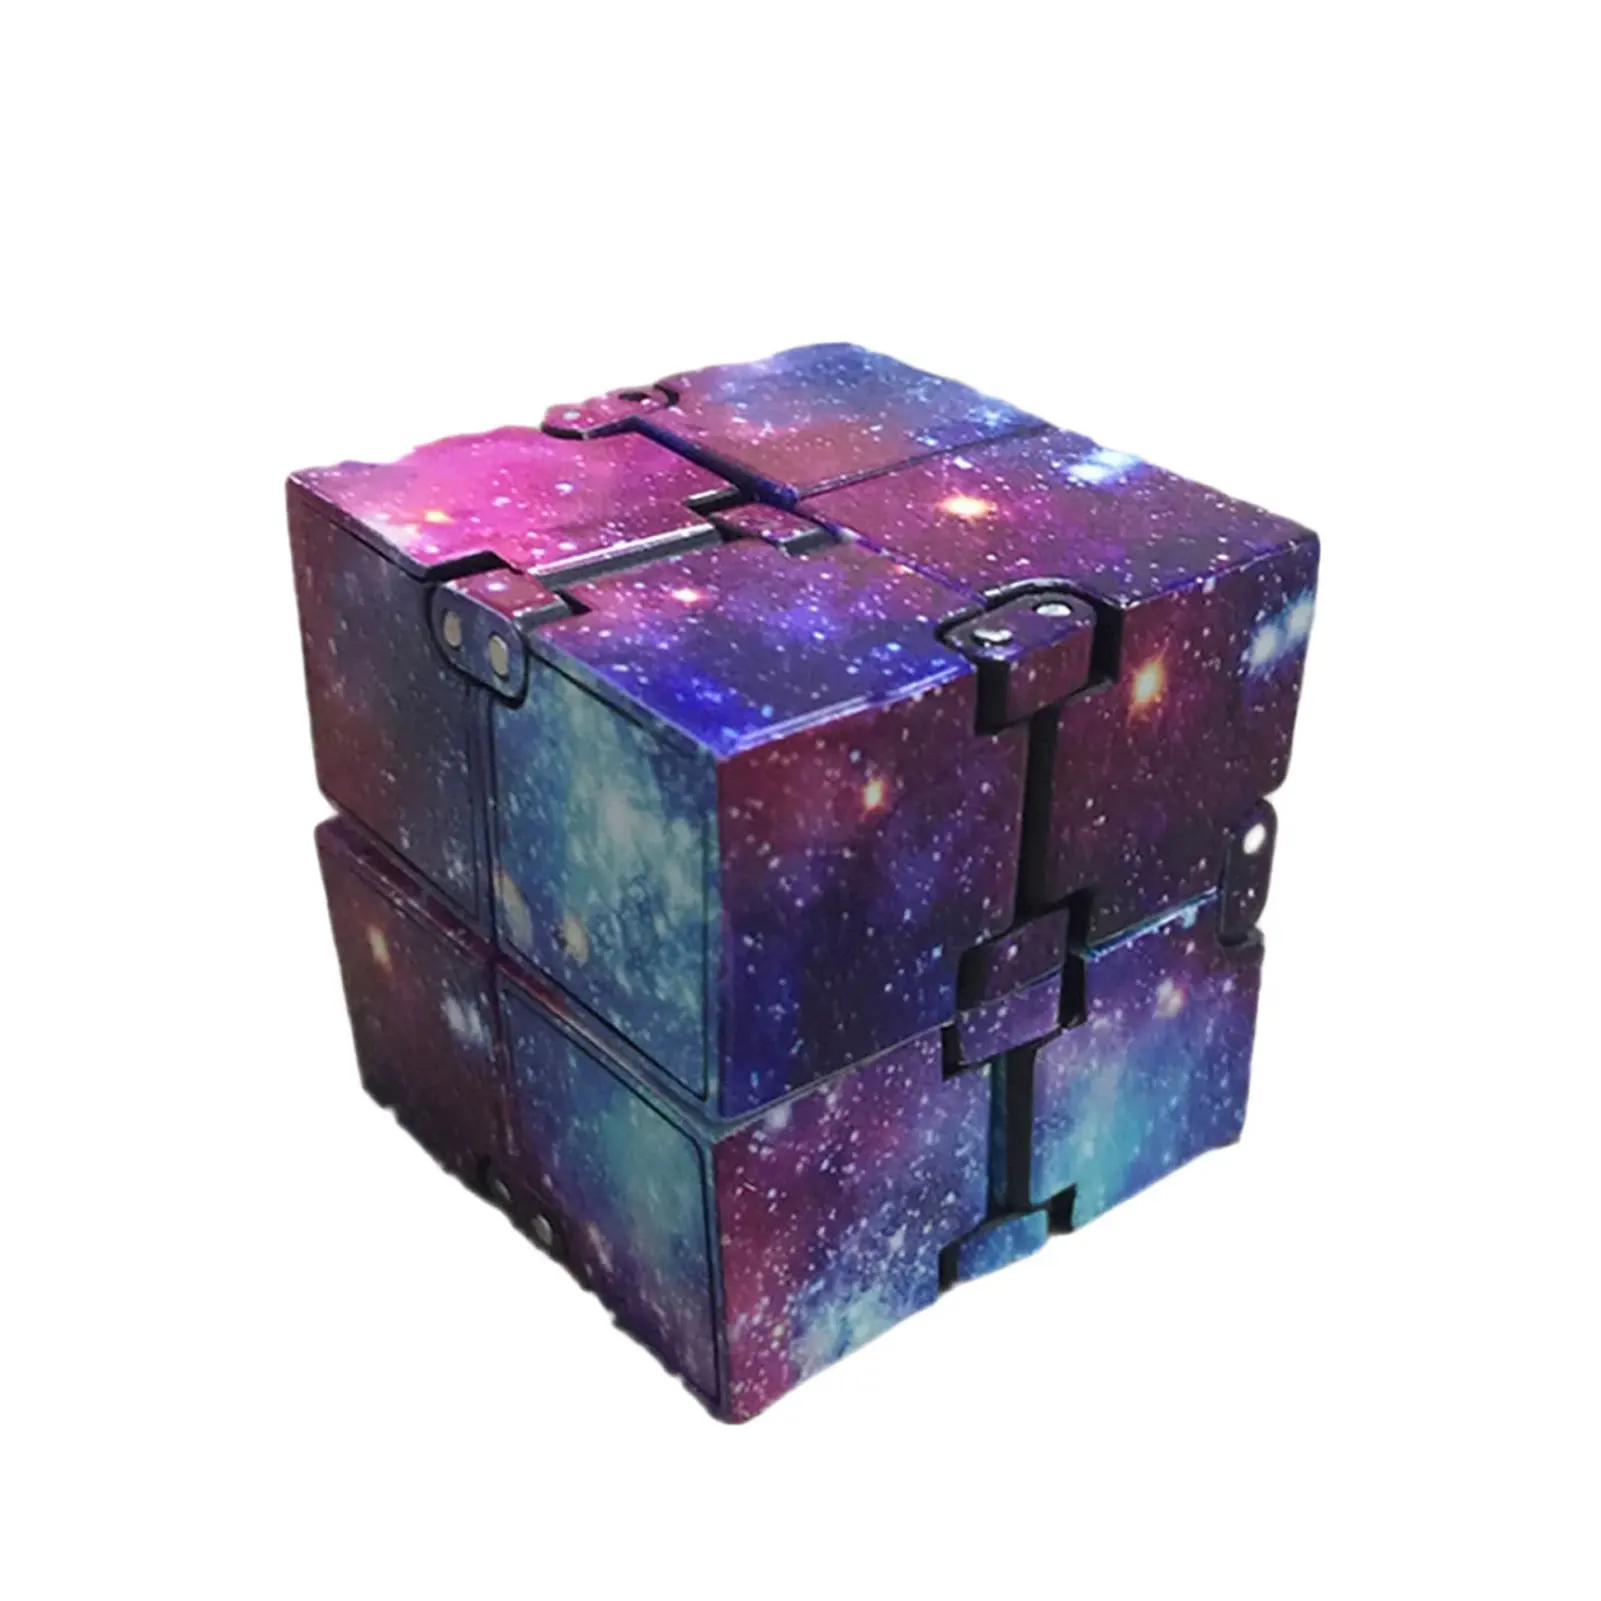 Puzzle Cube Durable Exquisite Decompression Toy Infinity Magic Cube For Adults Kids Fidget Case Antistress Anxiety Desk Toy 23